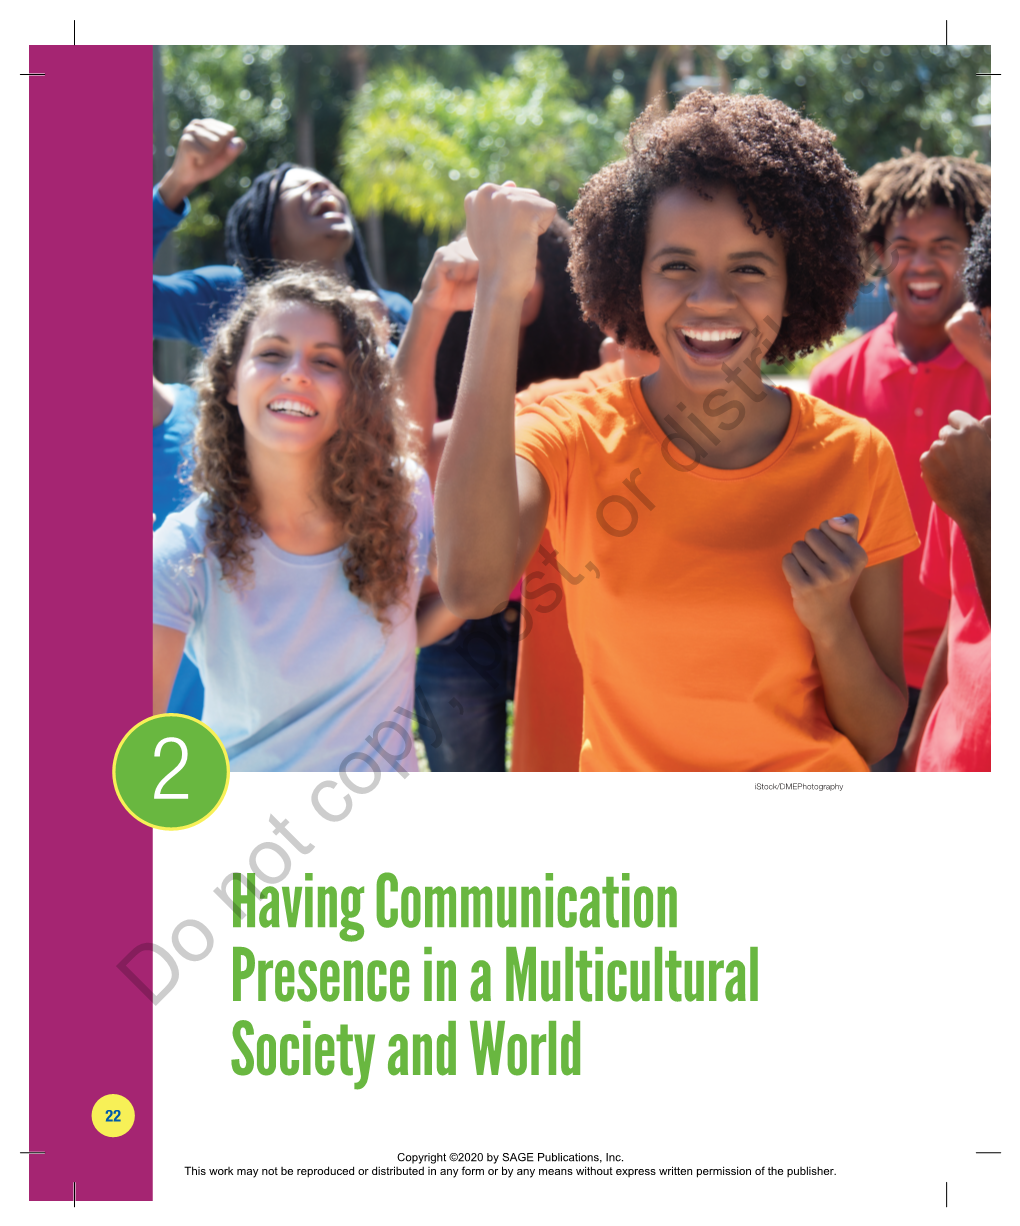 Having Communication Presence in a Multicultural Society and World 23